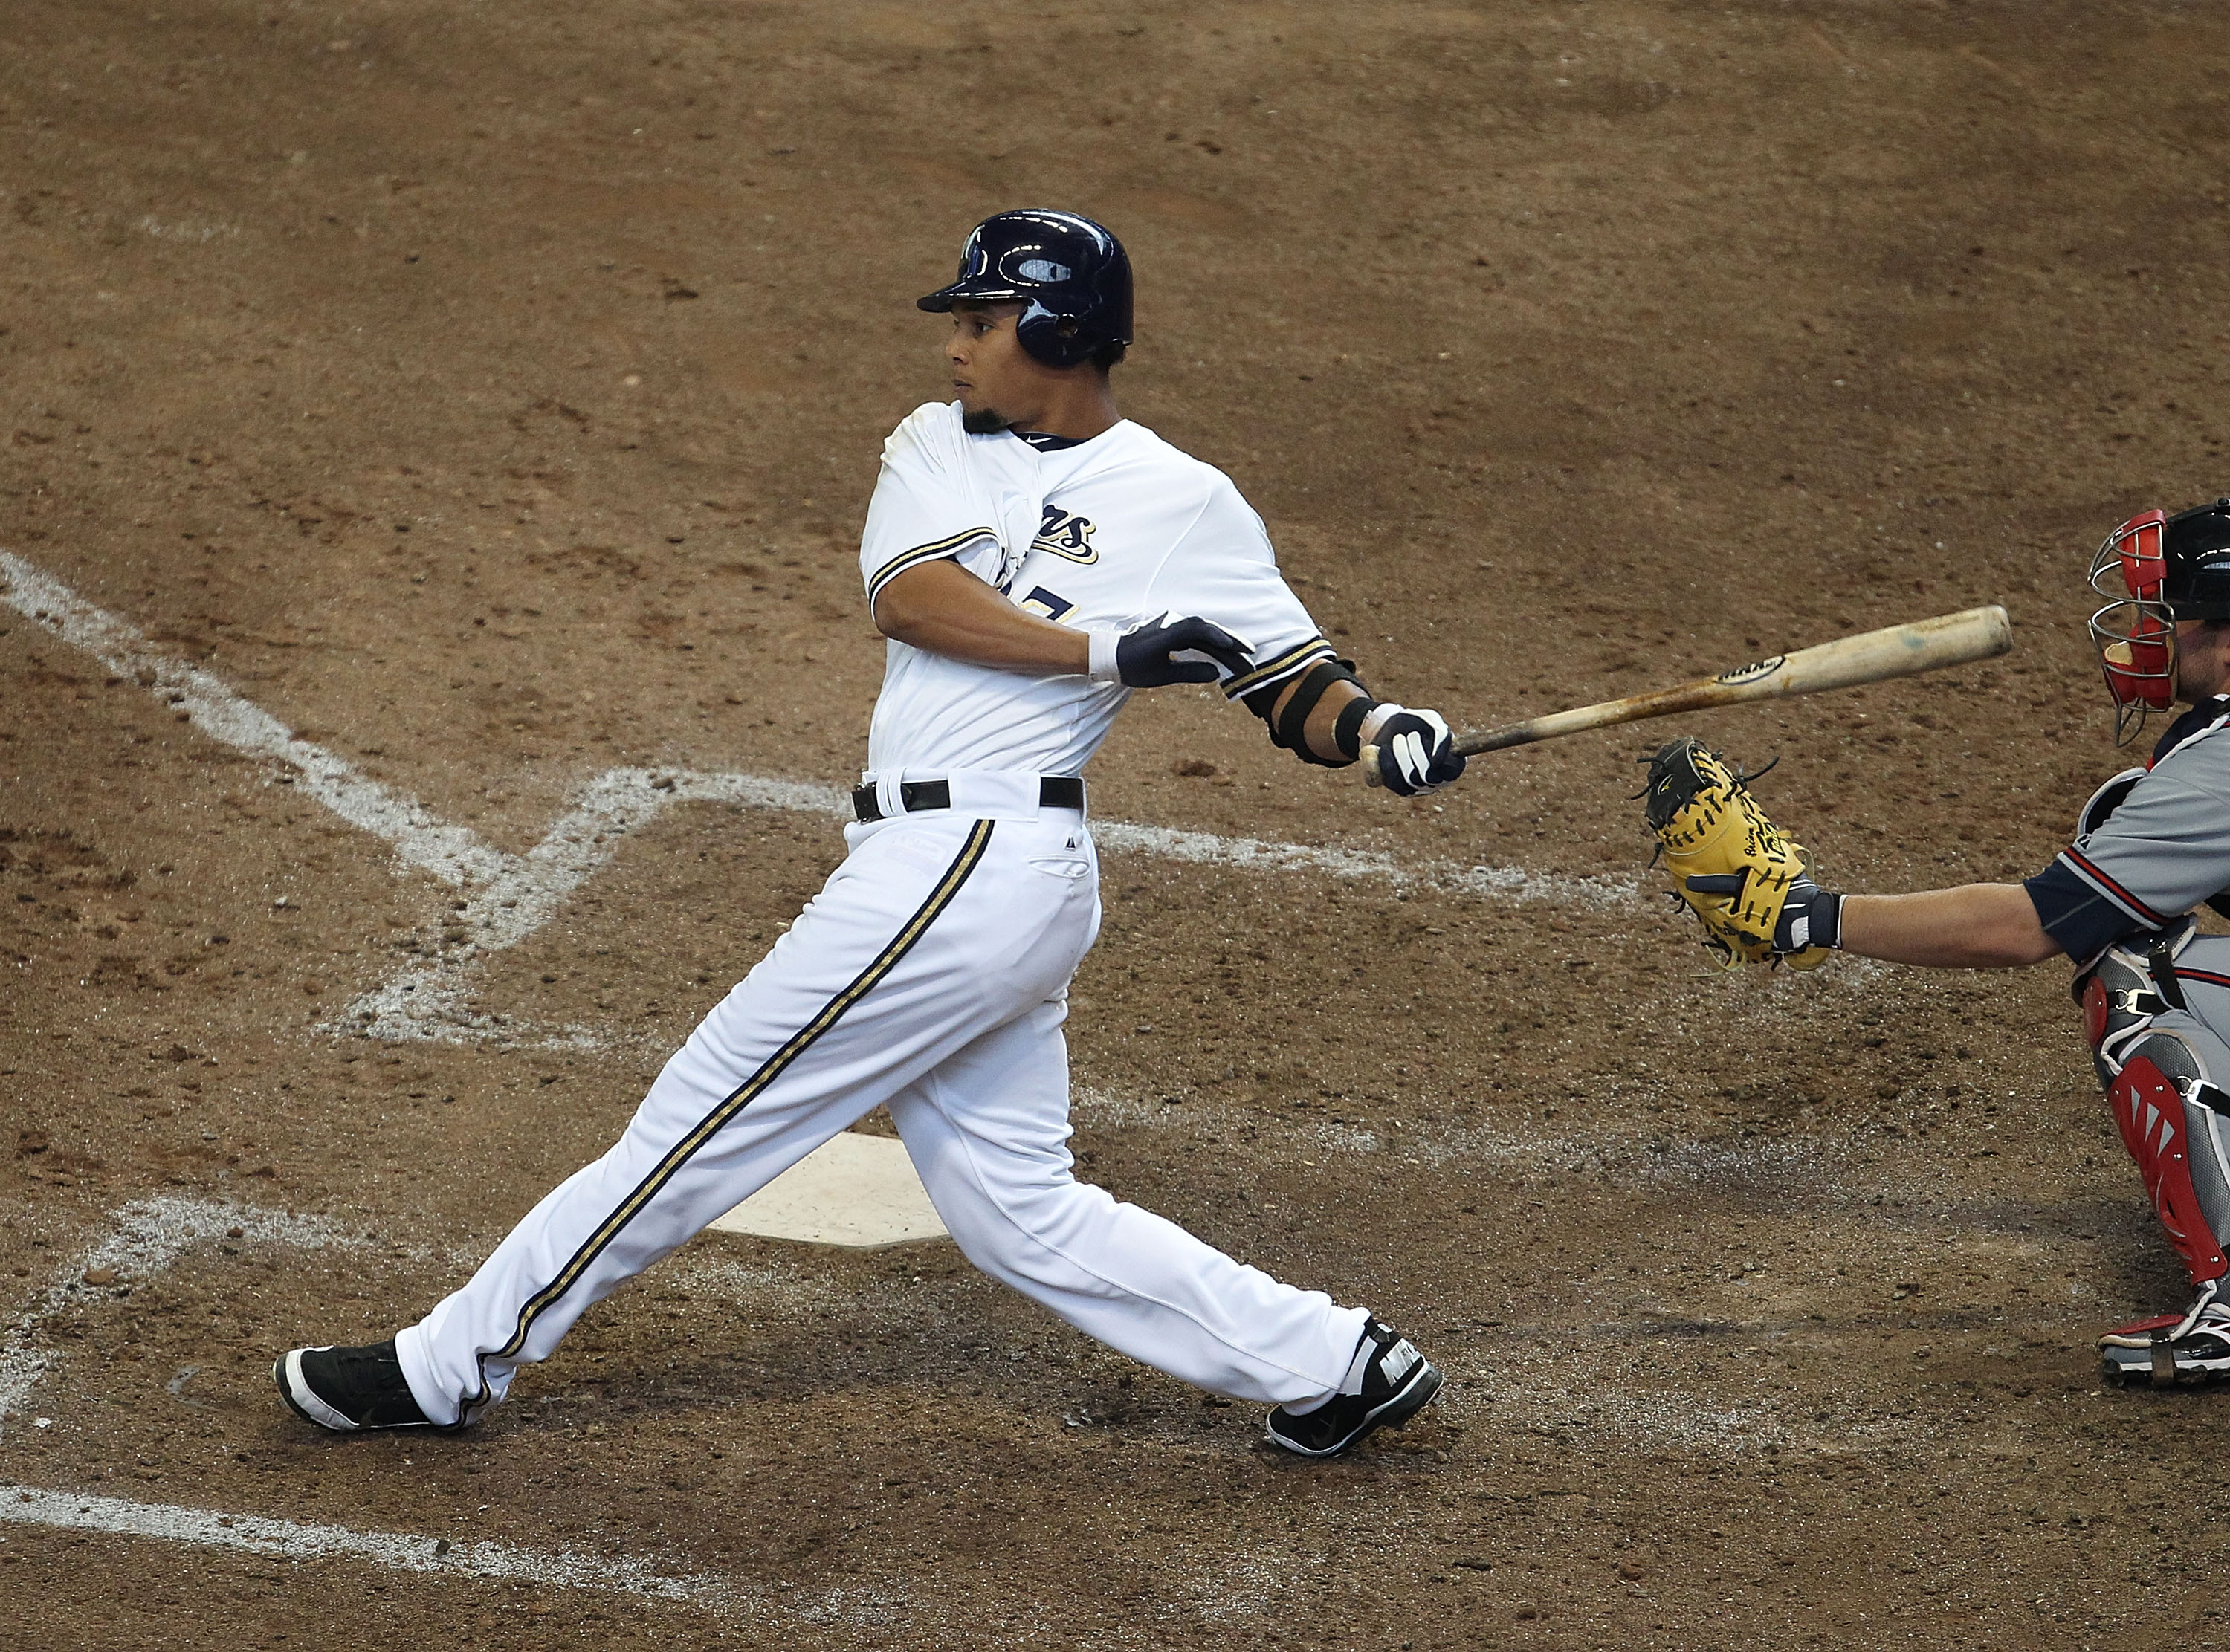 MILWAUKEE, WI - APRIL 04: Carlos Gomez #27 of the Milwaukee Brewers hits the ball against the Atlanta Braves during the home opener at Miller Park on April 4, 2011 in Milwaukee, Wisconsin. The Braves defeated the Brewers 2-1. (Photo by Jonathan Daniel/Get